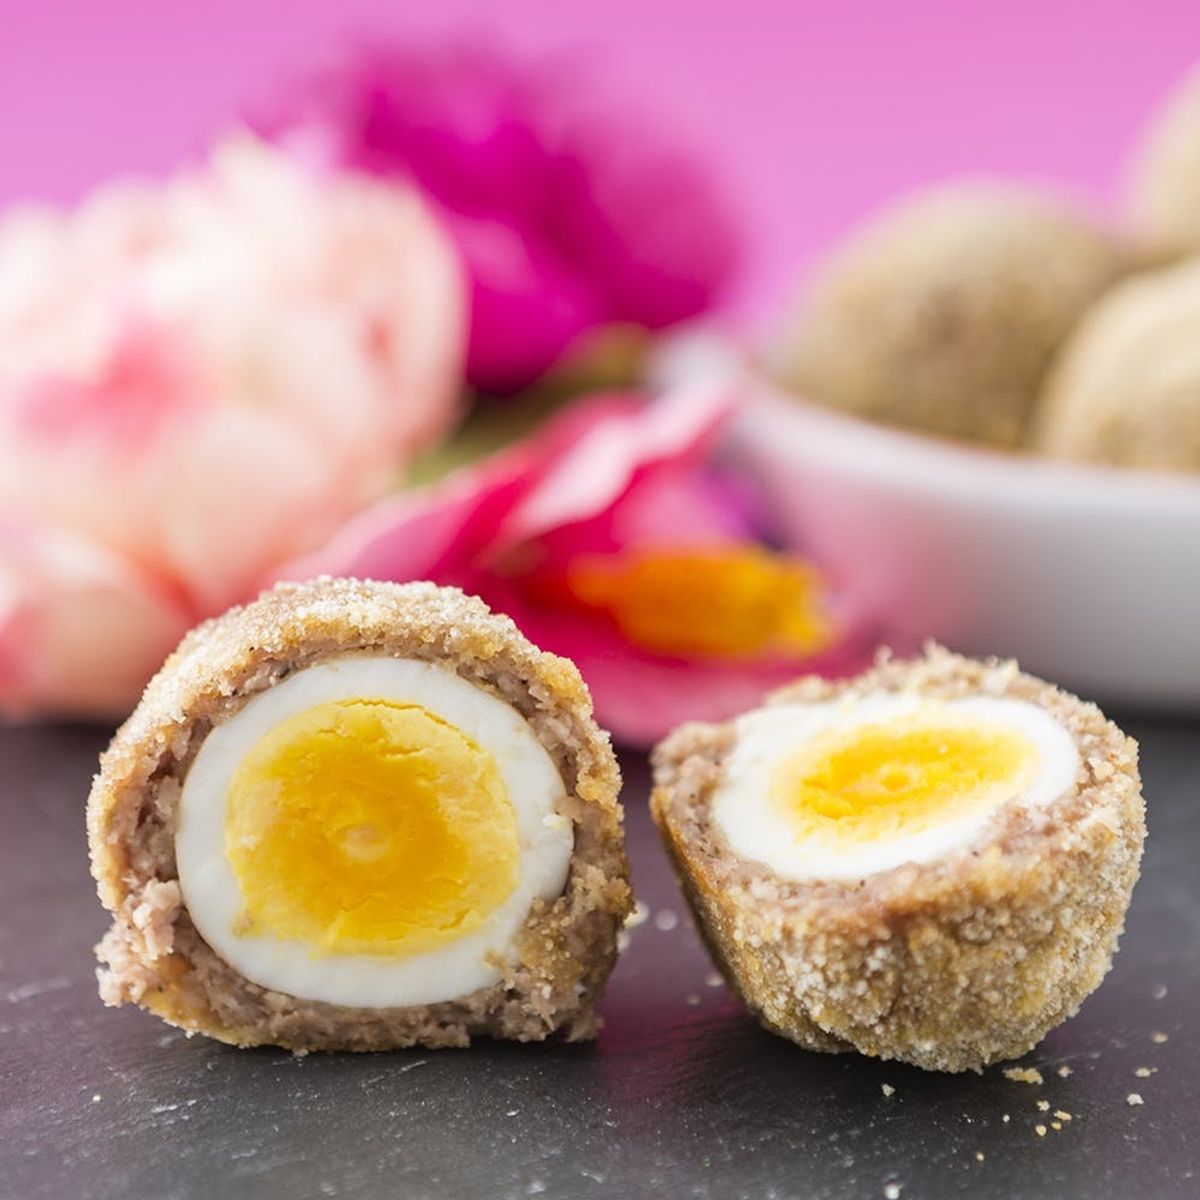 This Baked Scotch Eggs Recipe Will Be the Star of Your Easter Brunch